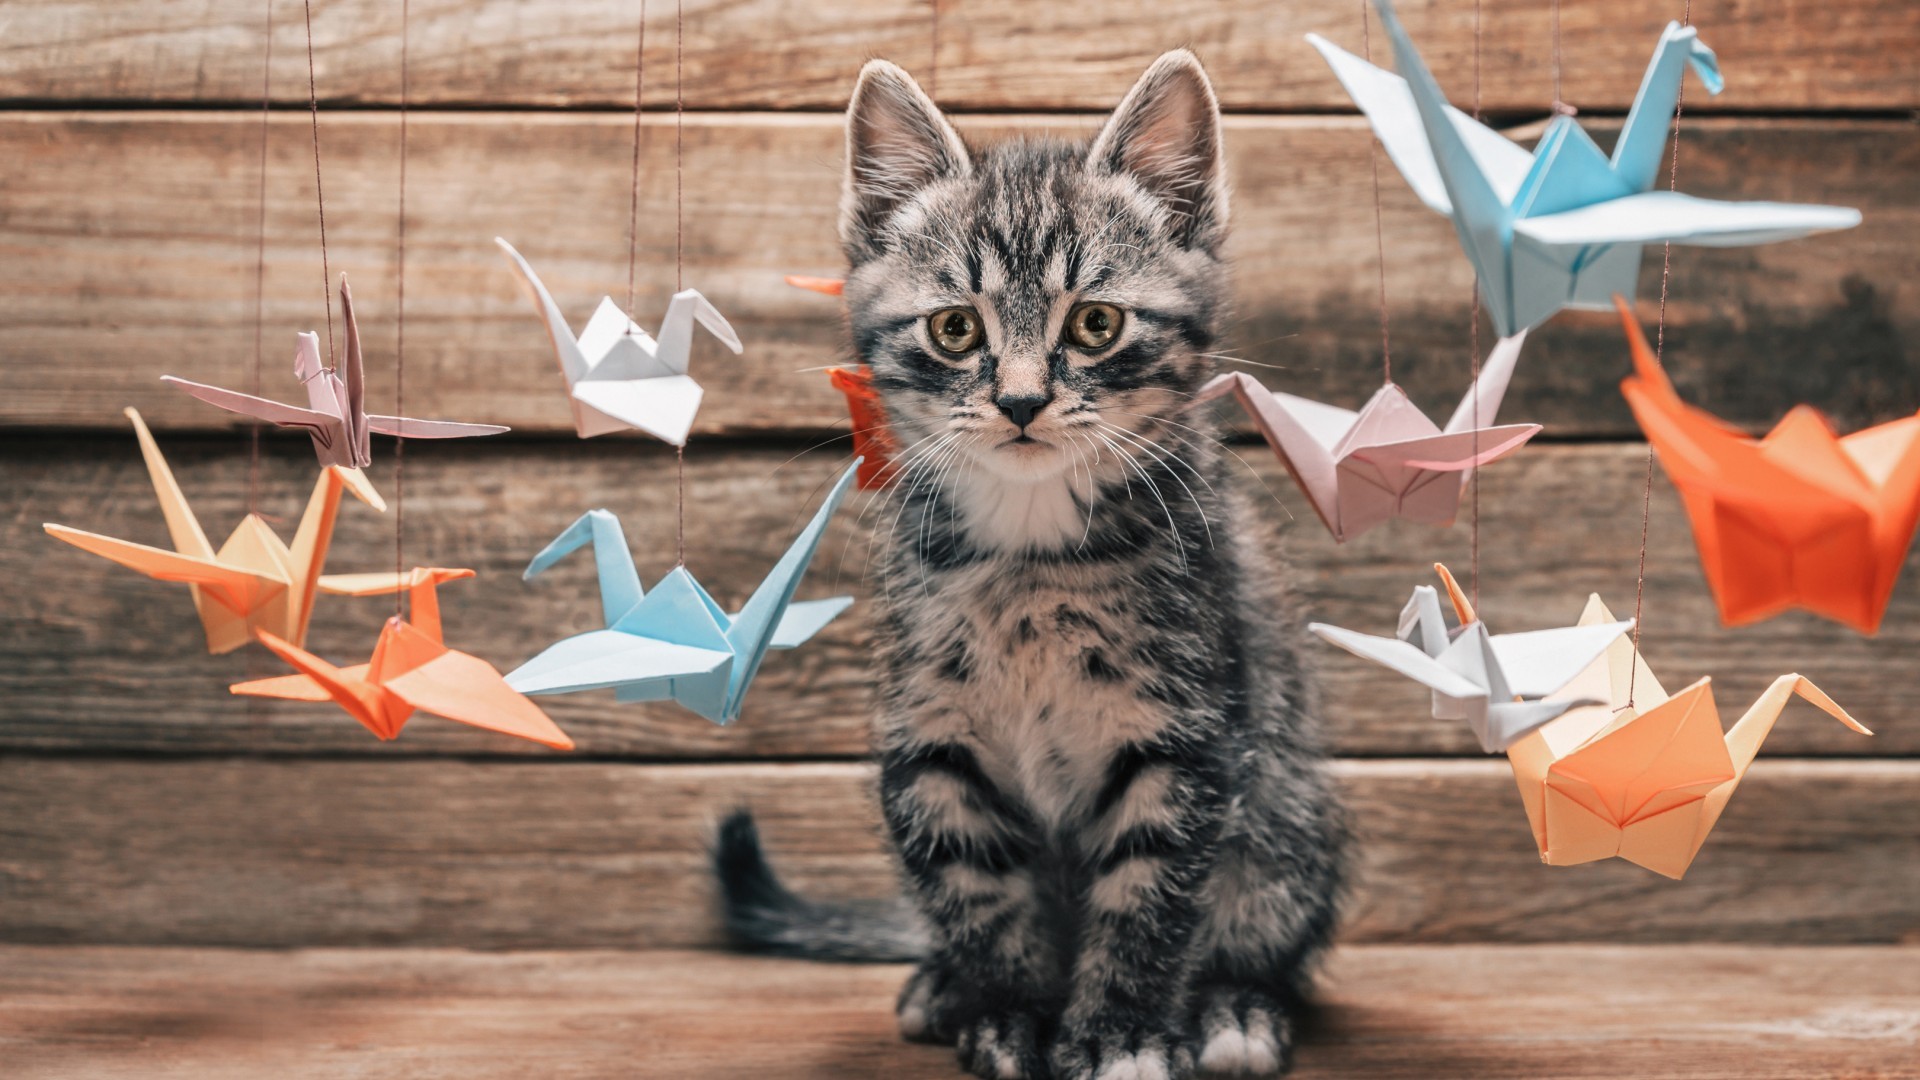 Nature Animals Cats Kittens Baby Animals Origami Birds Wooden Surface Thread Pet Depth Of Field 1920x1080